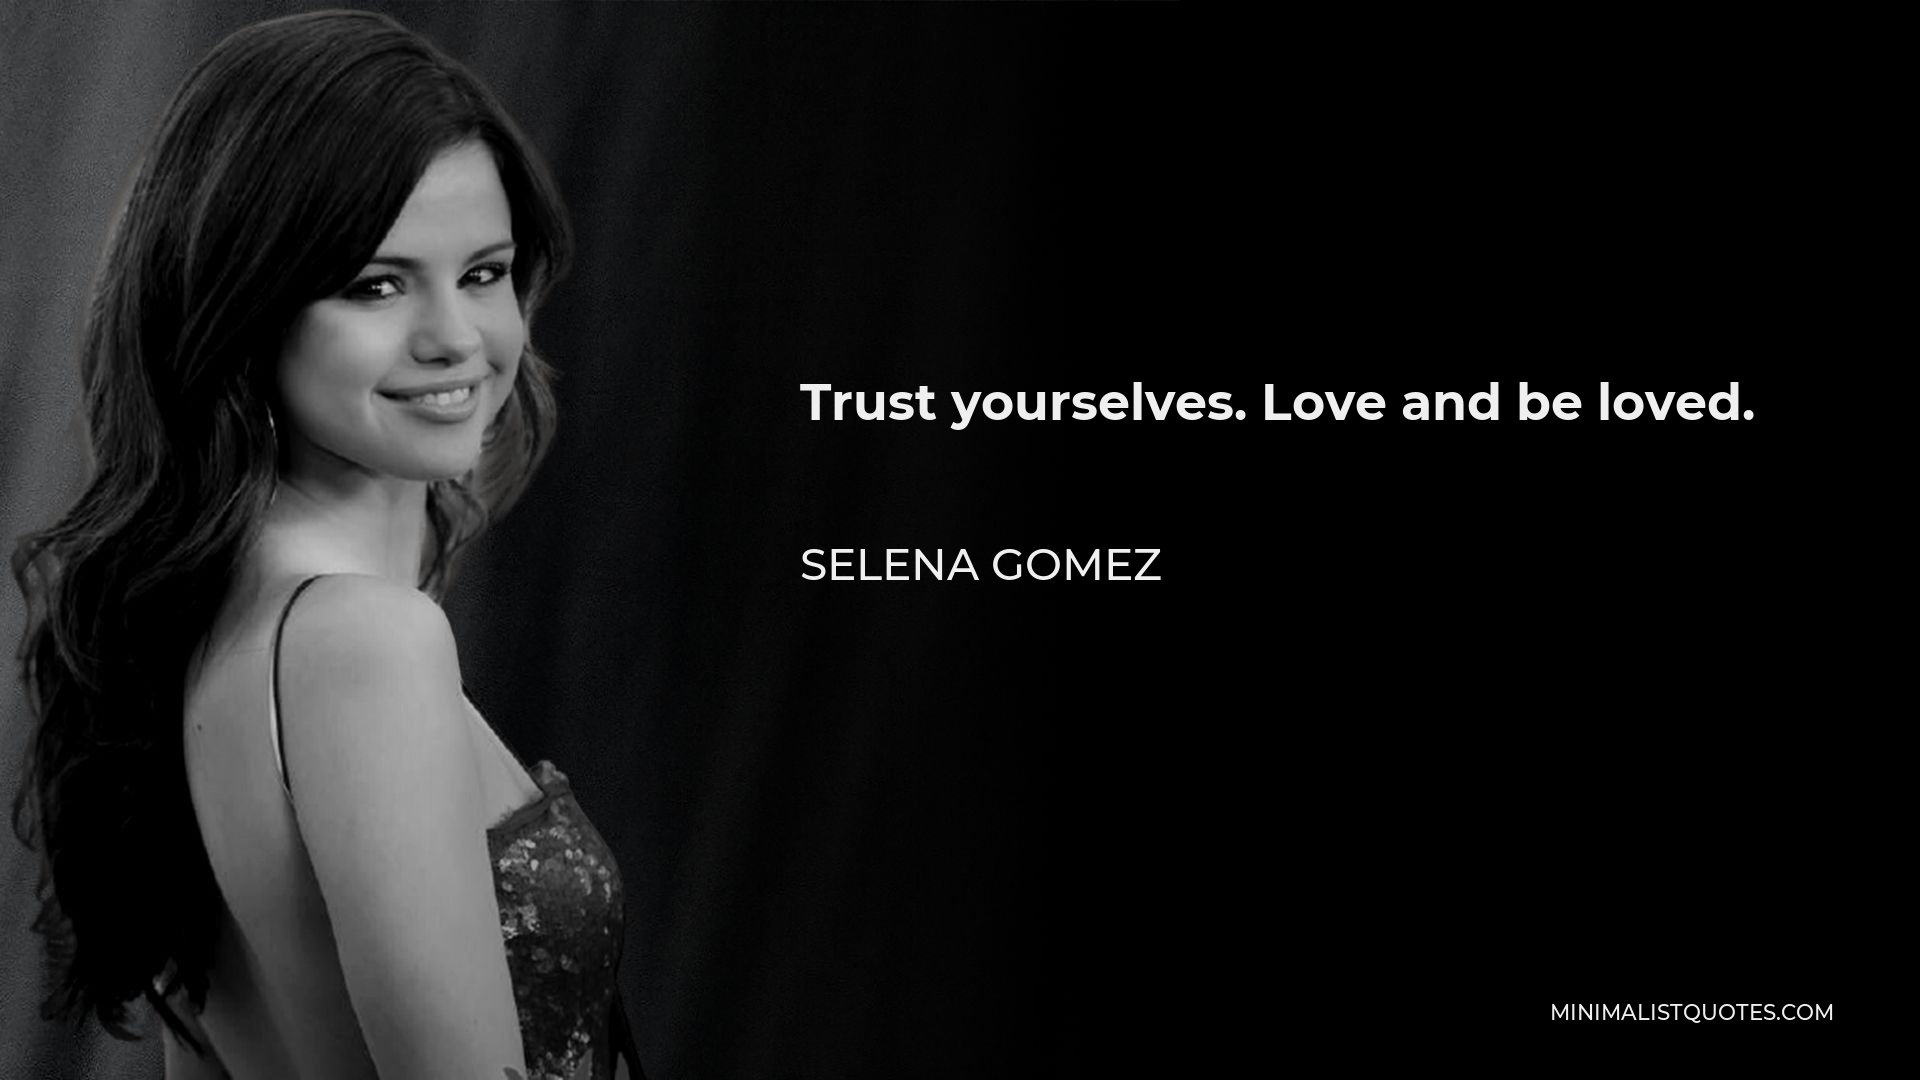 Selena Gomez Quote - Trust yourselves. Love and be loved.